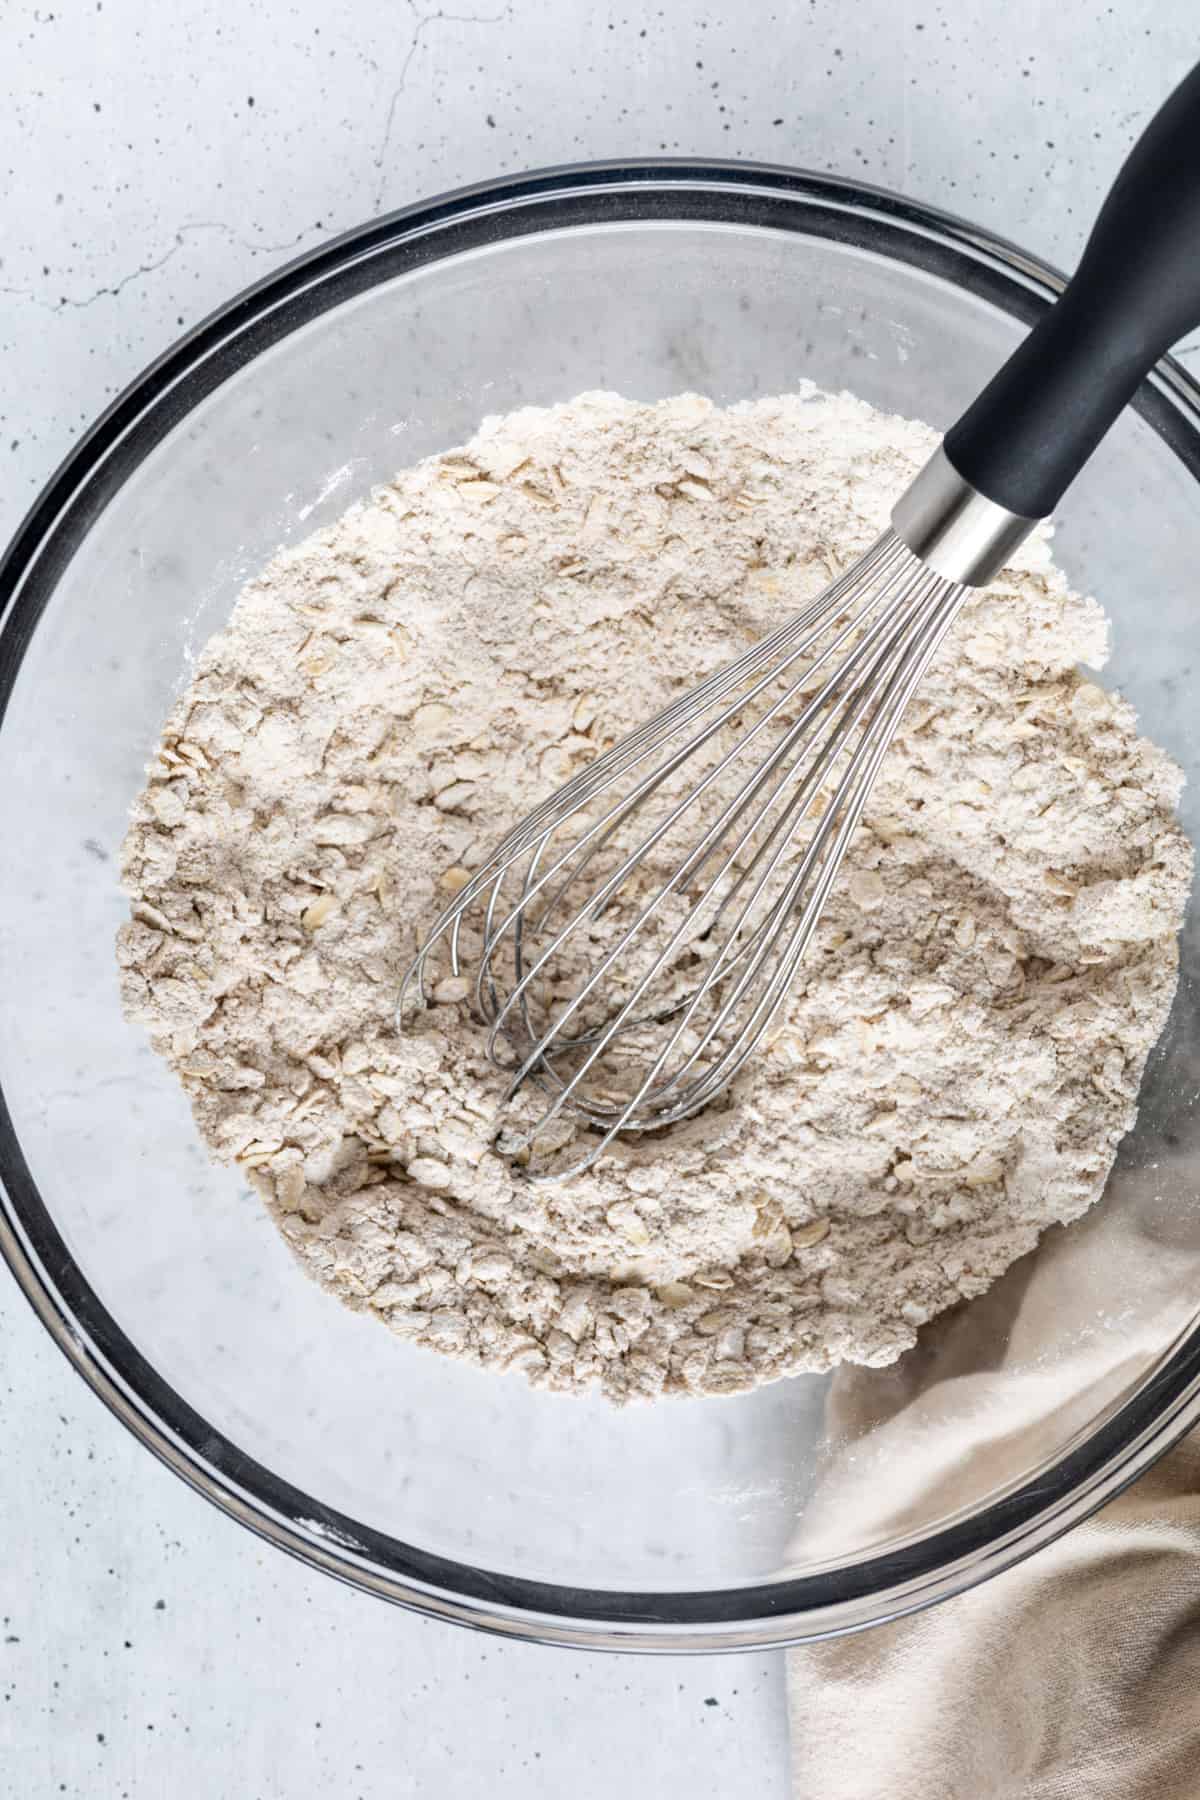 The dry ingredients in a large bowl with a whisk.